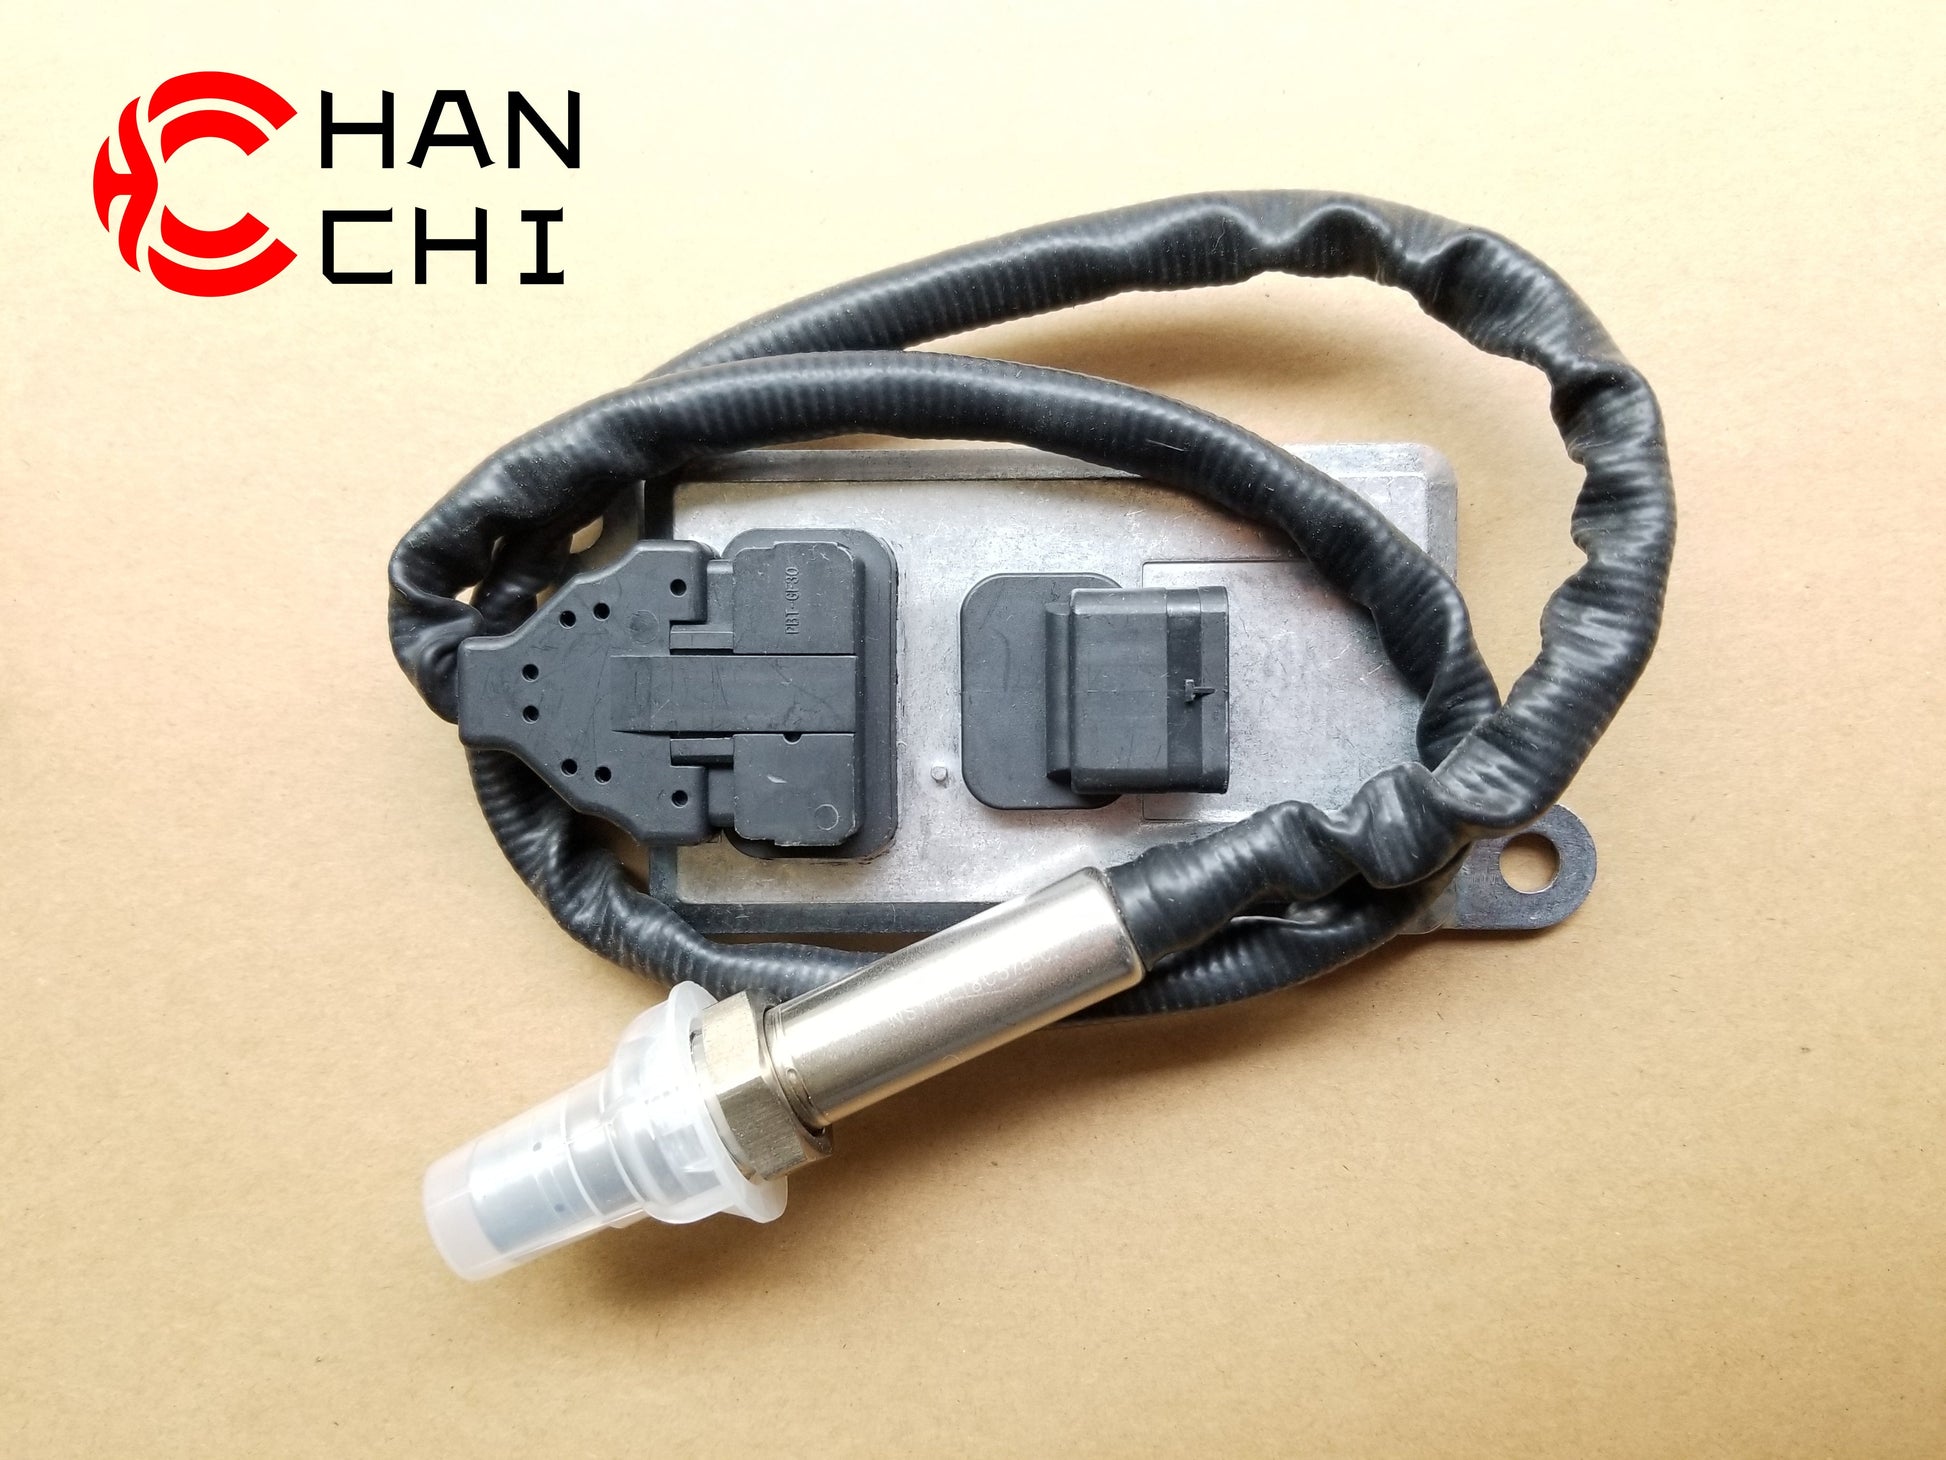 OEM: 5WK96618B 51.15408-0009Material: ABS metalColor: black silverOrigin: Made in ChinaWeight: 400gPacking List: 1* Nitrogen oxide sensor NOx More ServiceWe can provide OEM Manufacturing serviceWe can Be your one-step solution for Auto PartsWe can provide technical scheme for you Feel Free to Contact Us, We will get back to you as soon as possible.